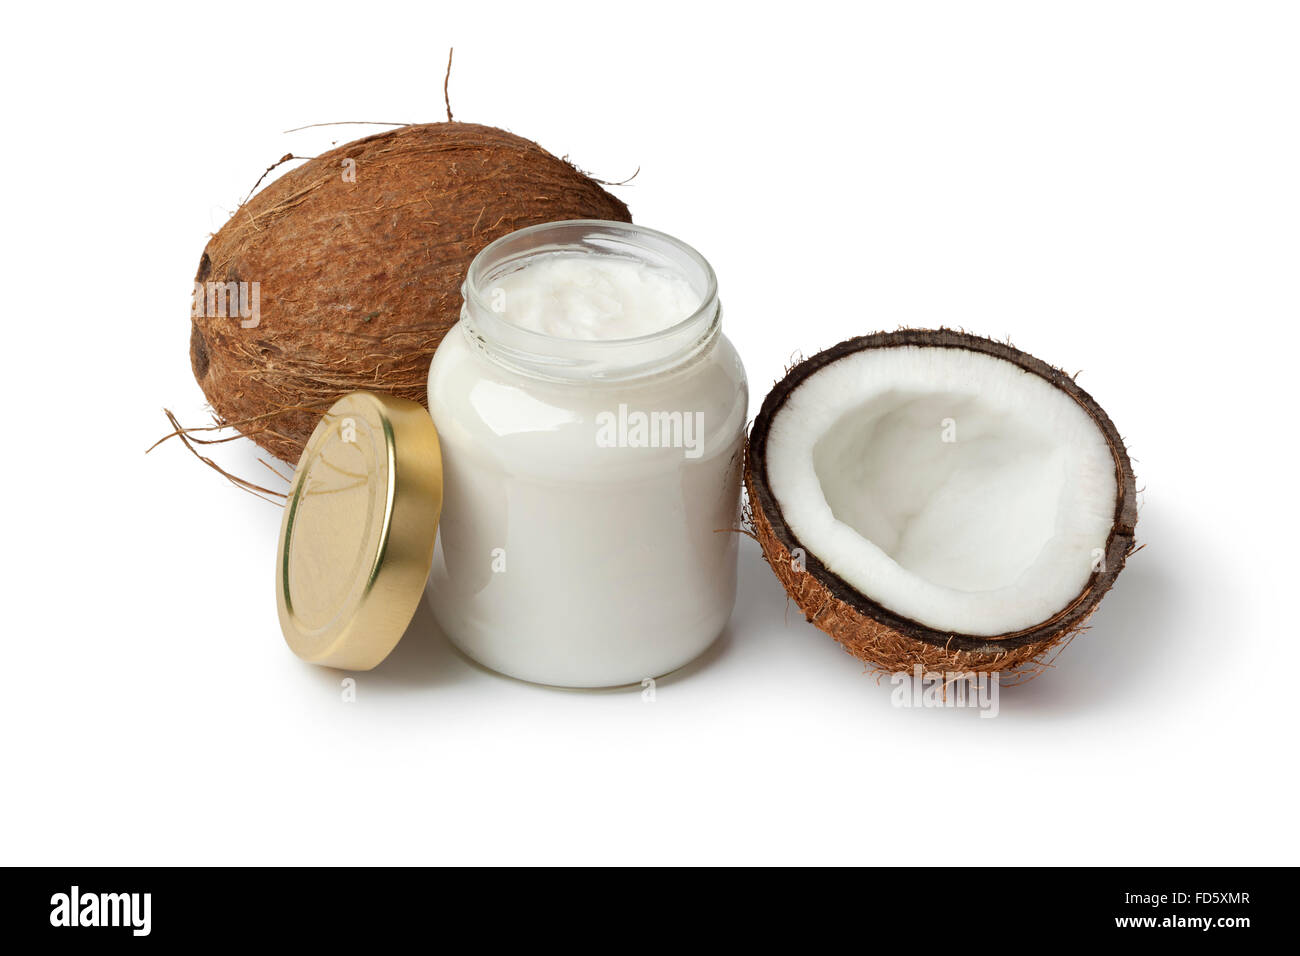 Coconut oil and fresh coconut on white background Stock Photo